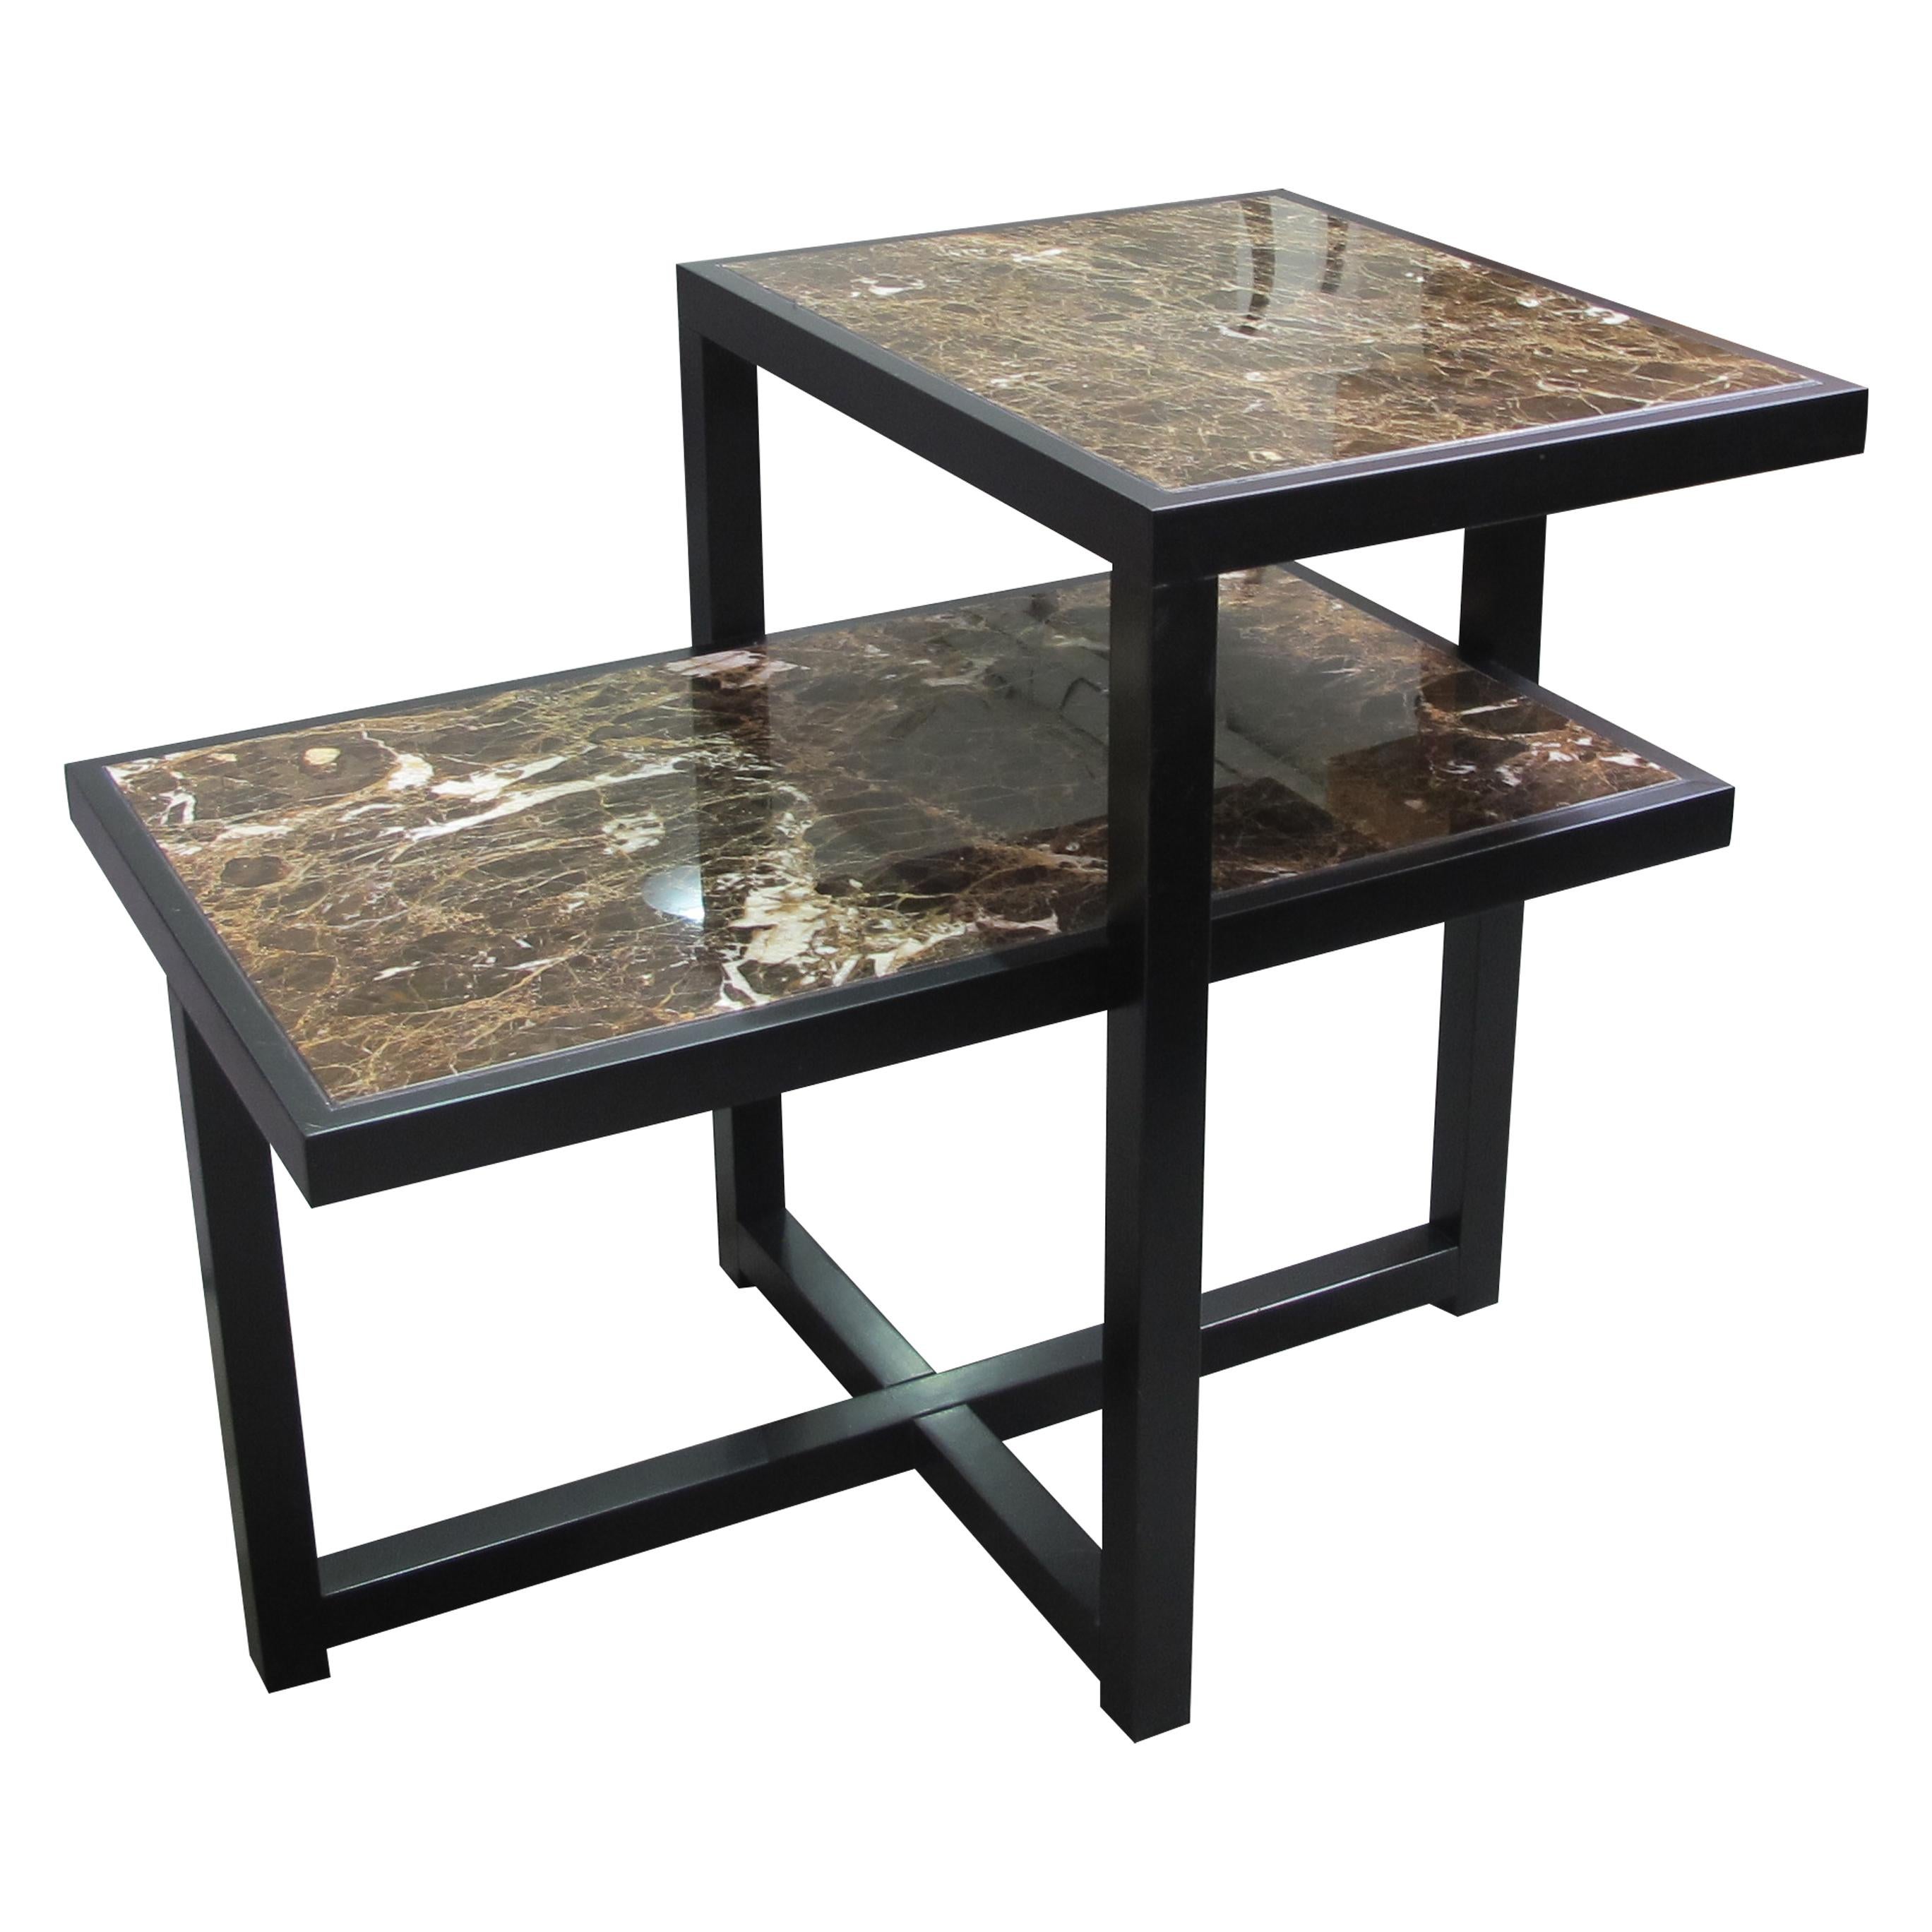 Pair of 1960s Italian Two-Tiered Side Tables with Marrón Emperador Marble Top 2